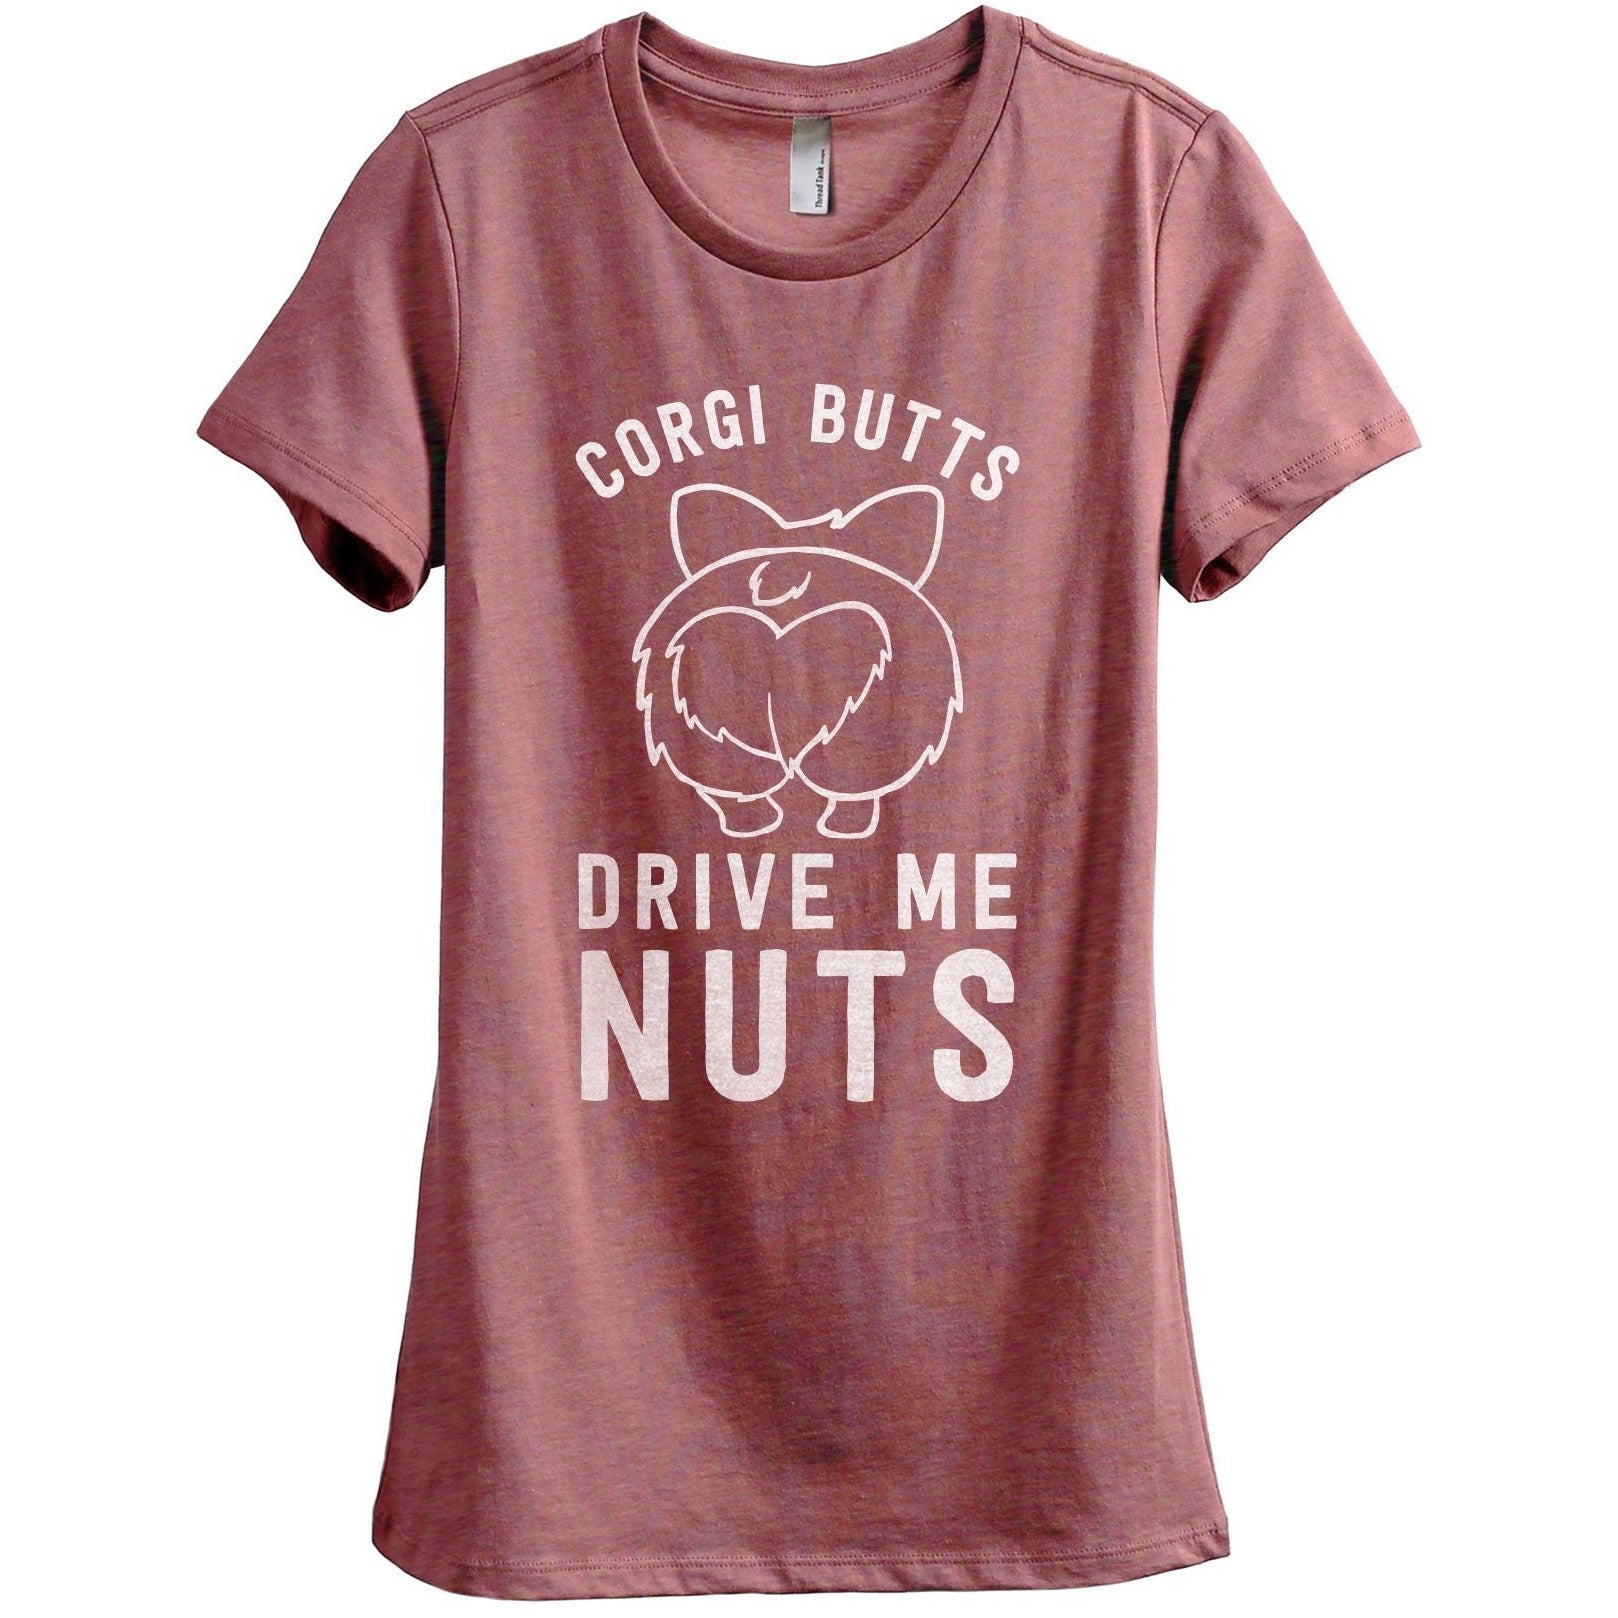 Corgi Butts Drive Me Nutts Women's Relaxed Crewneck T-Shirt Top Tee Heather Rouge